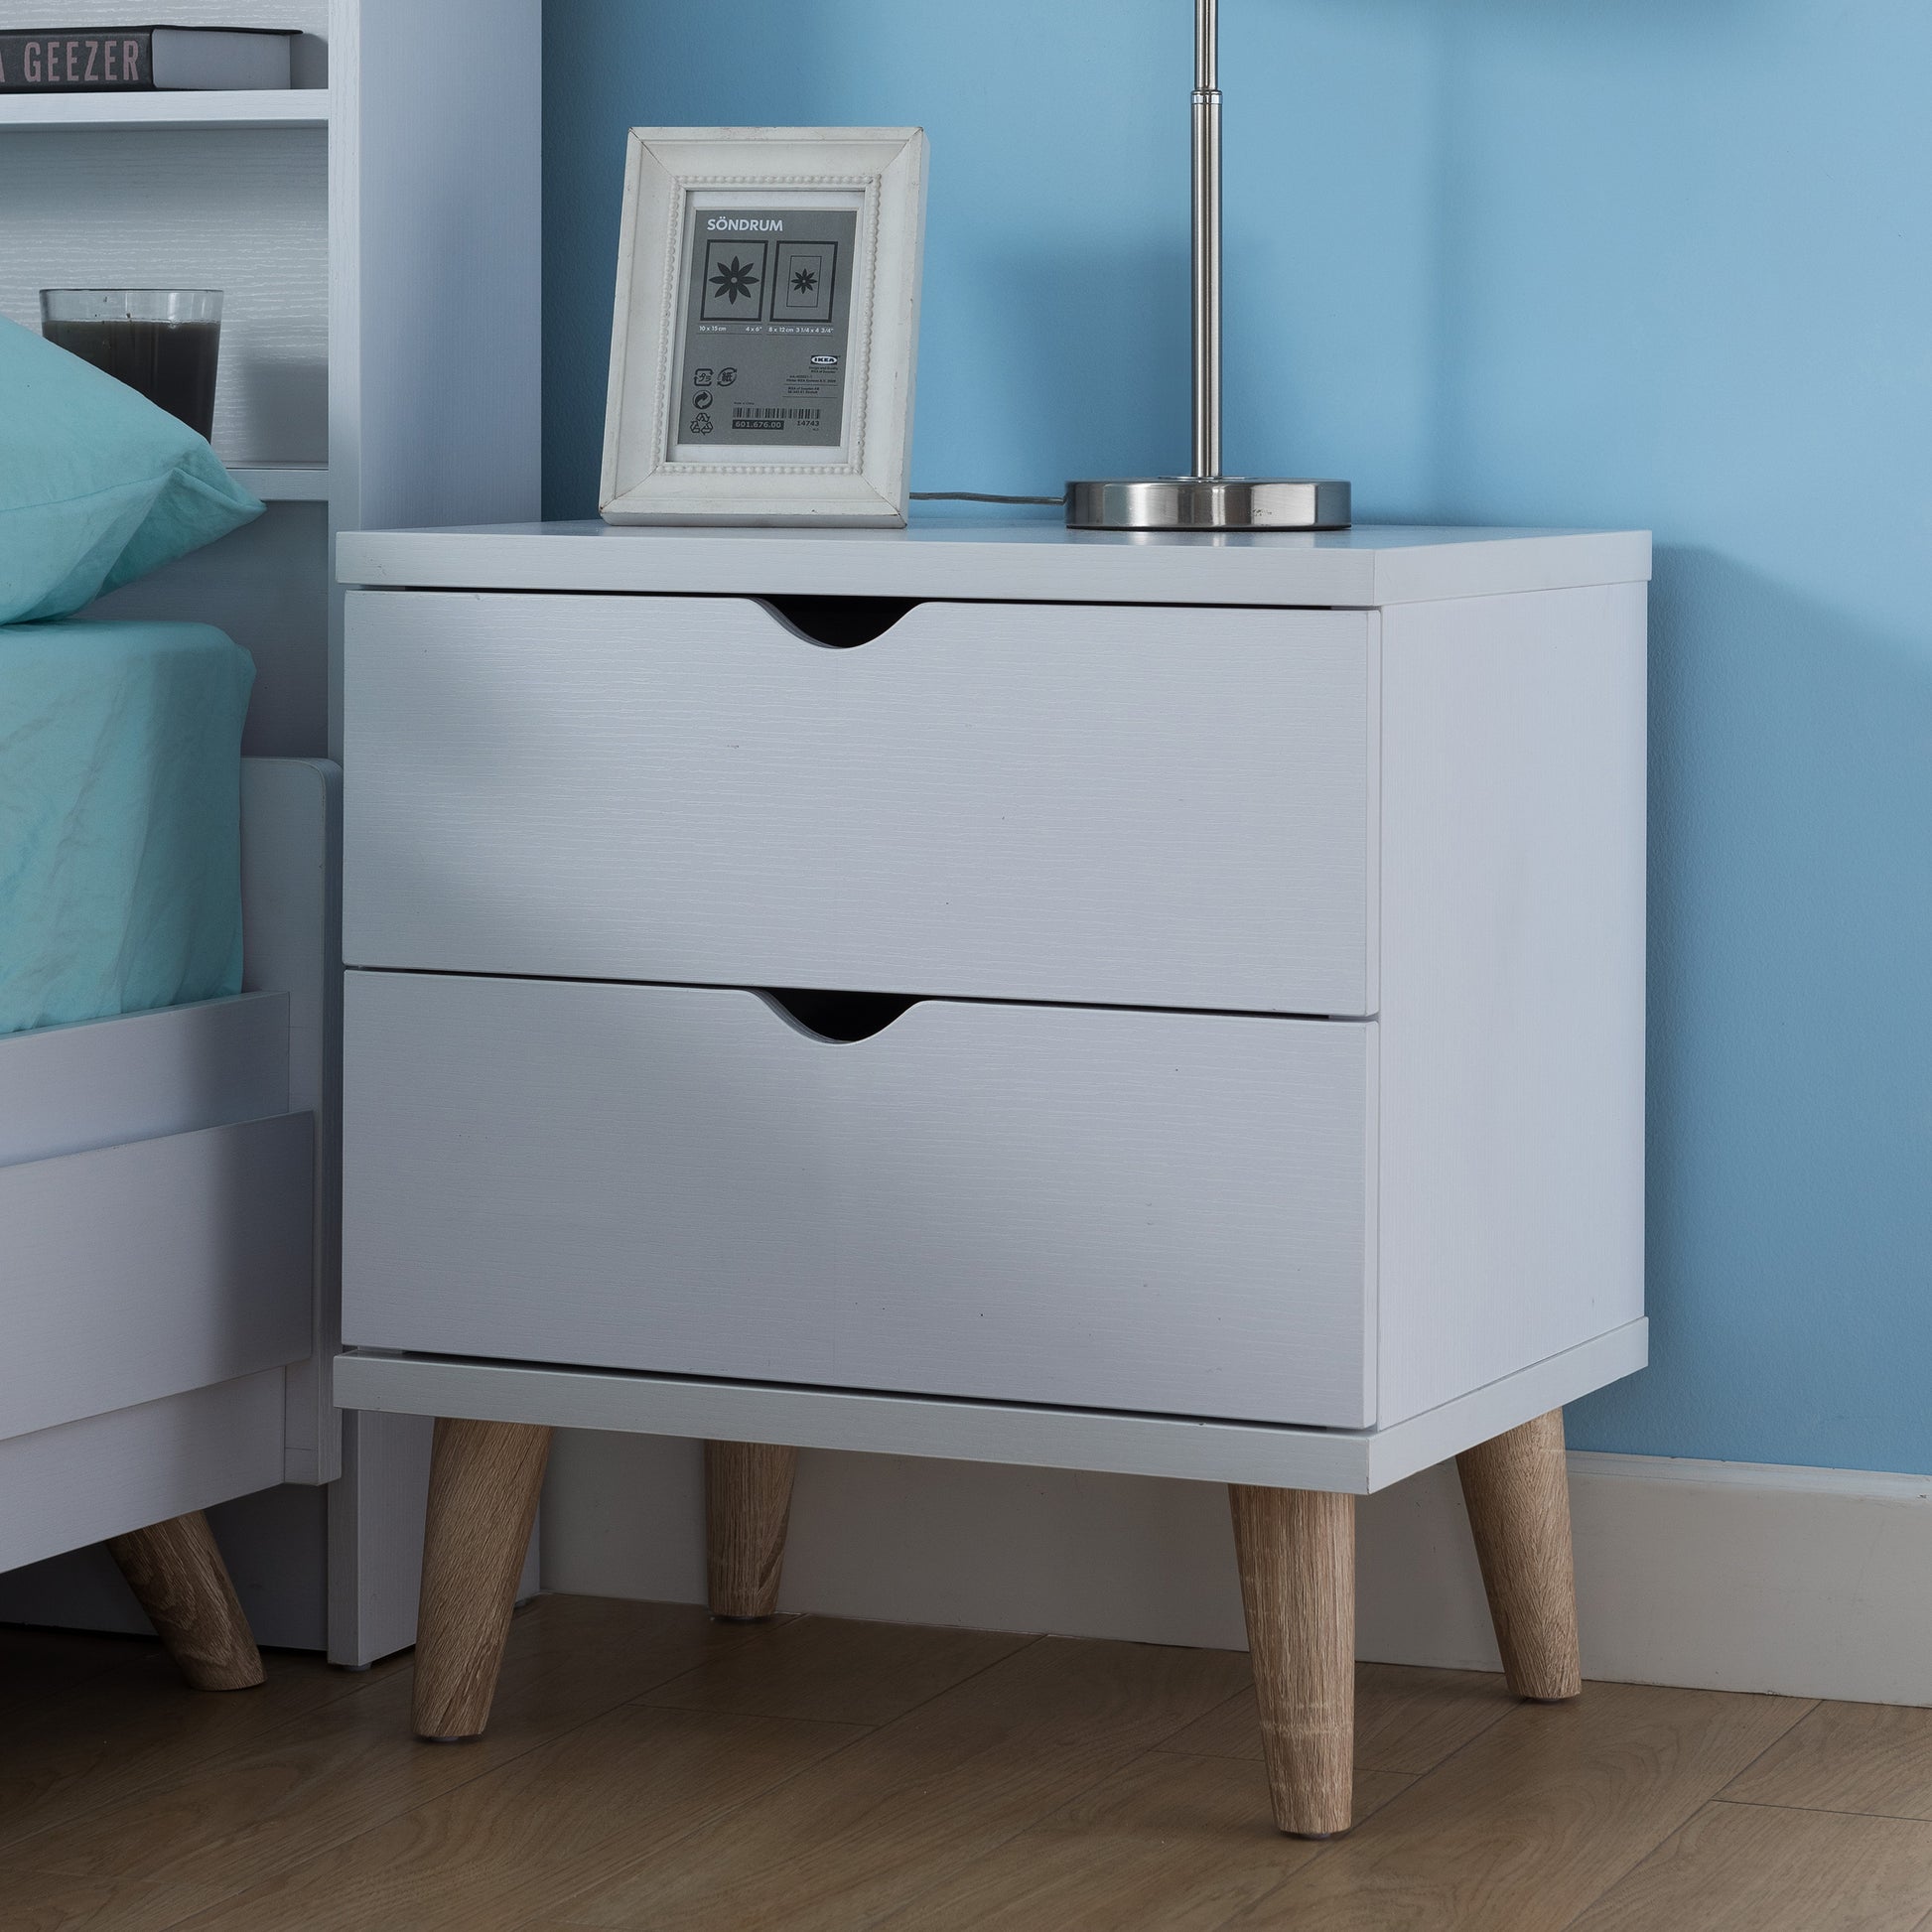 Left angled mid-century modern white two-drawer nightstand in a bedroom with accessories